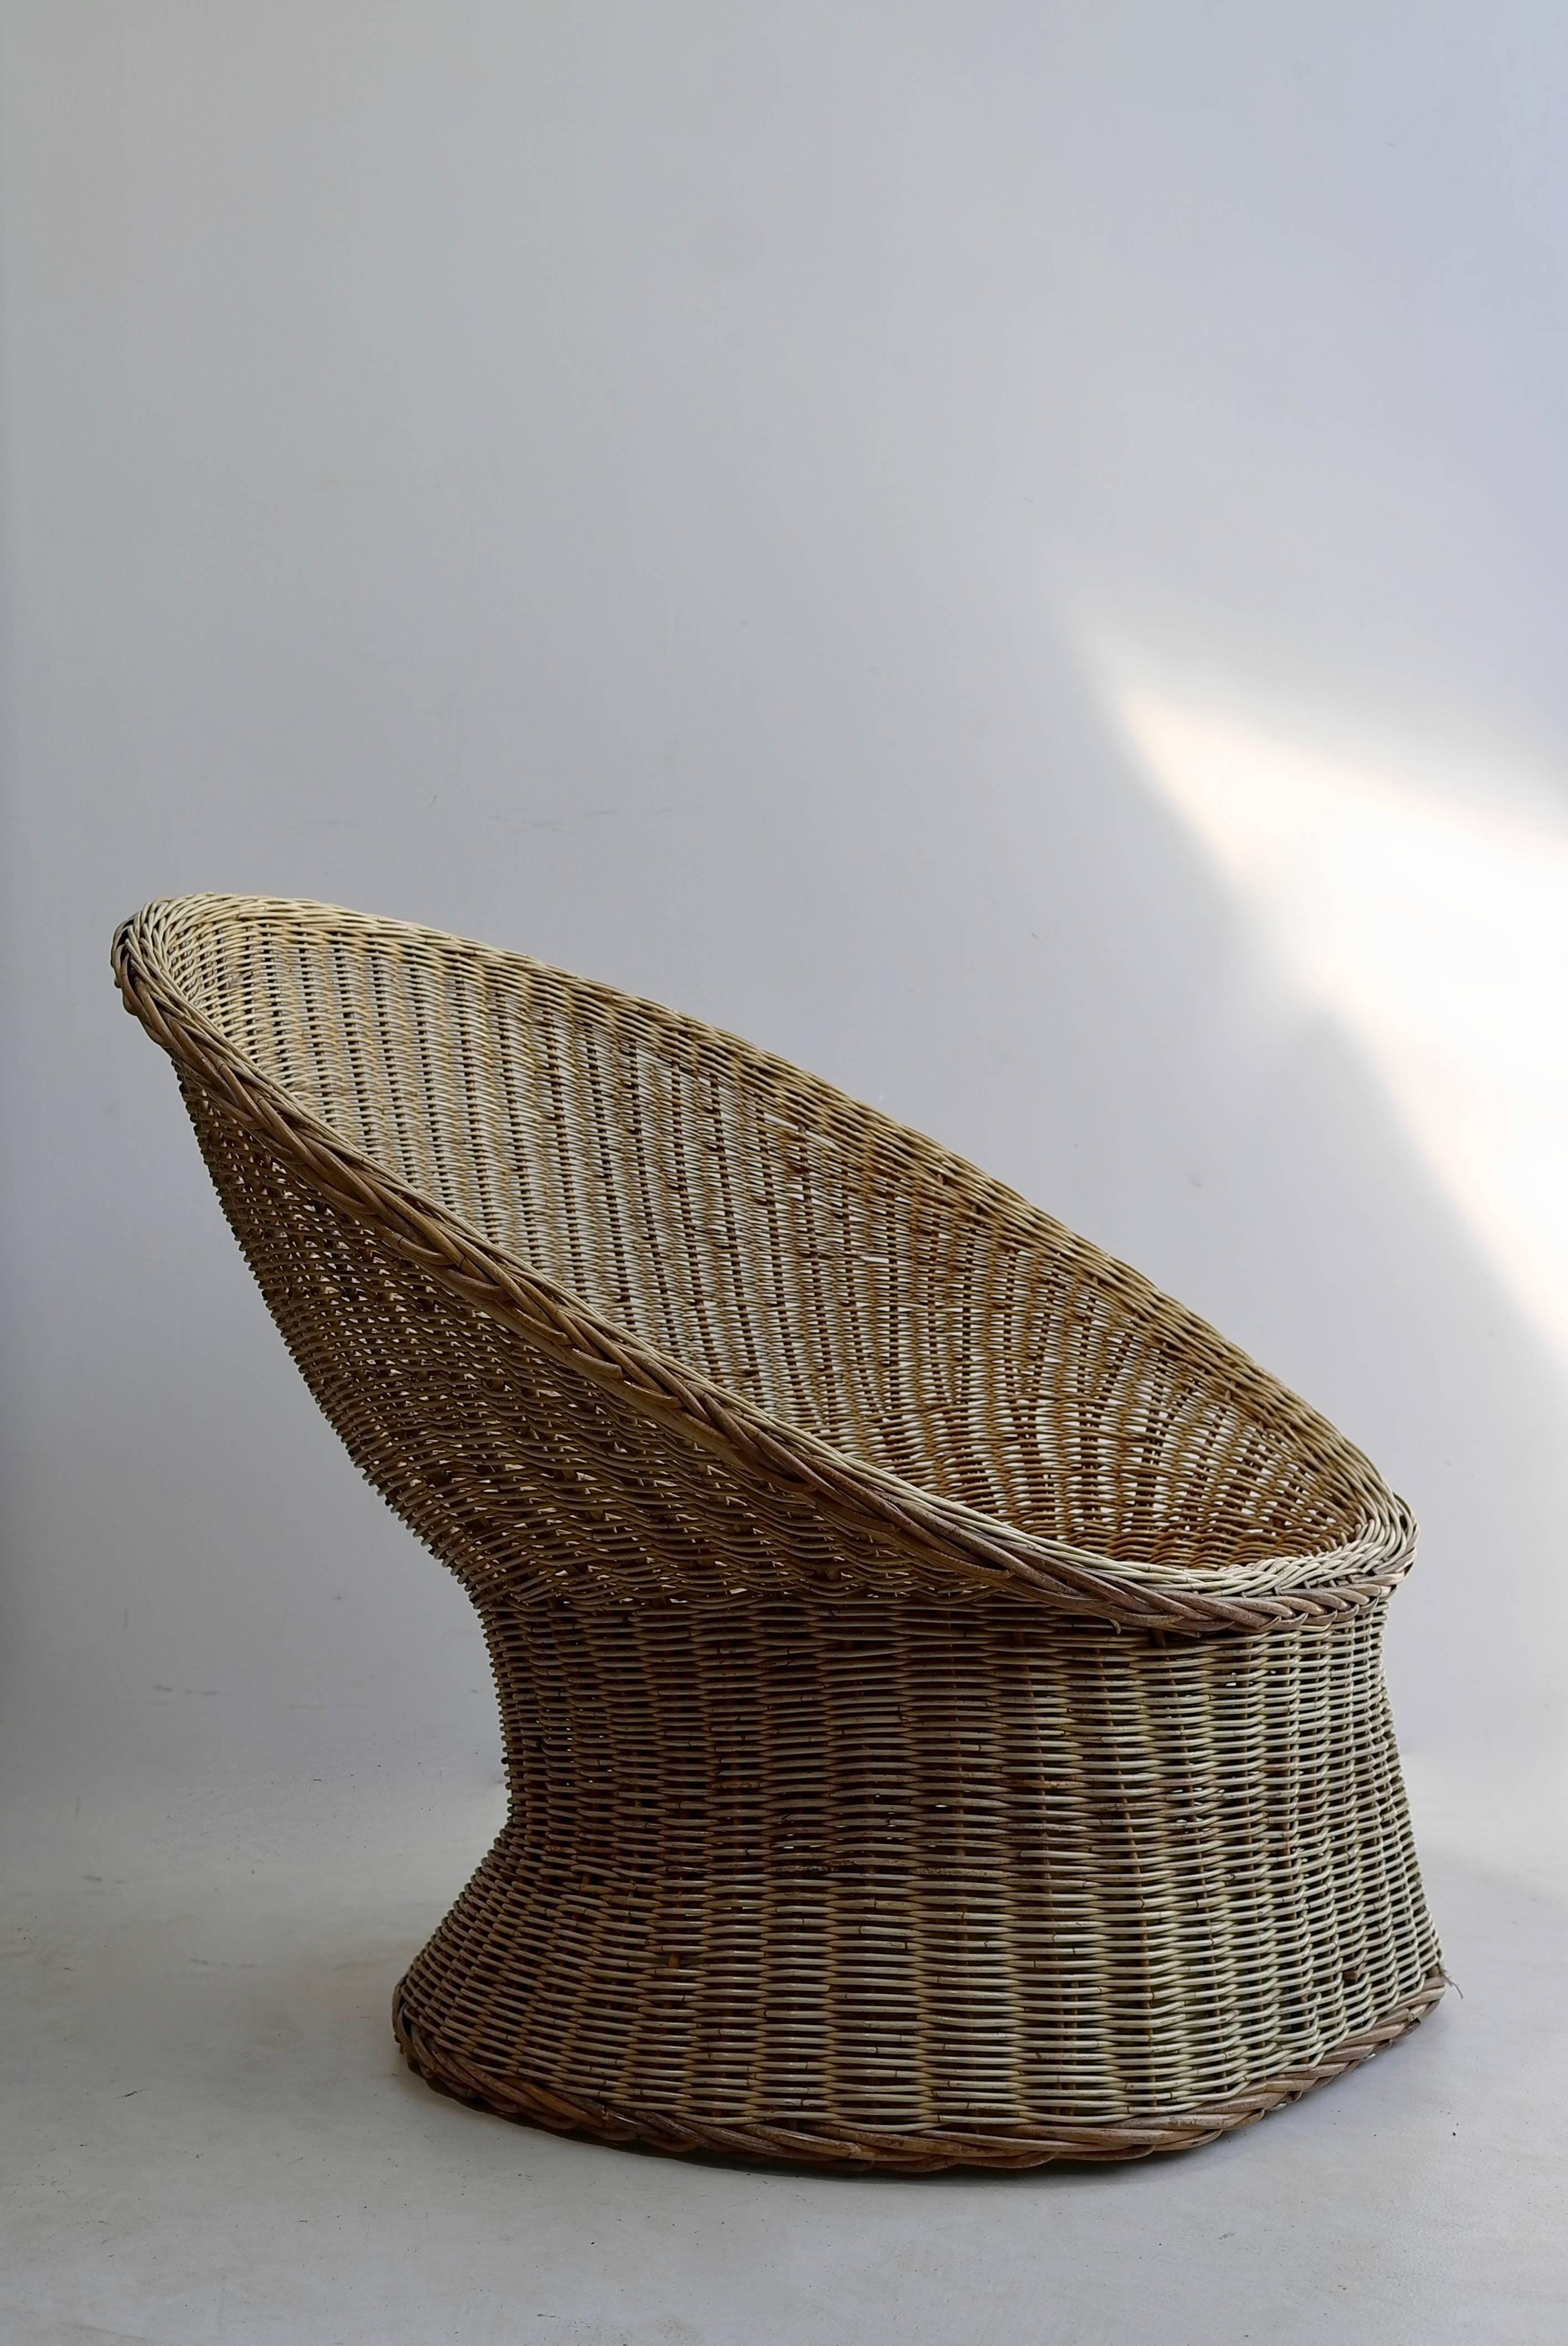 
Rare wicker Egg shaped armchair by Wim Den Boon, Holland 1952 This armchair was designed by Wim Den Boon in 1952 and produced by the Jonkers brothers in Noordwolde. This armchair was showed at the Amsterdam Stedelijk Museum exposition in